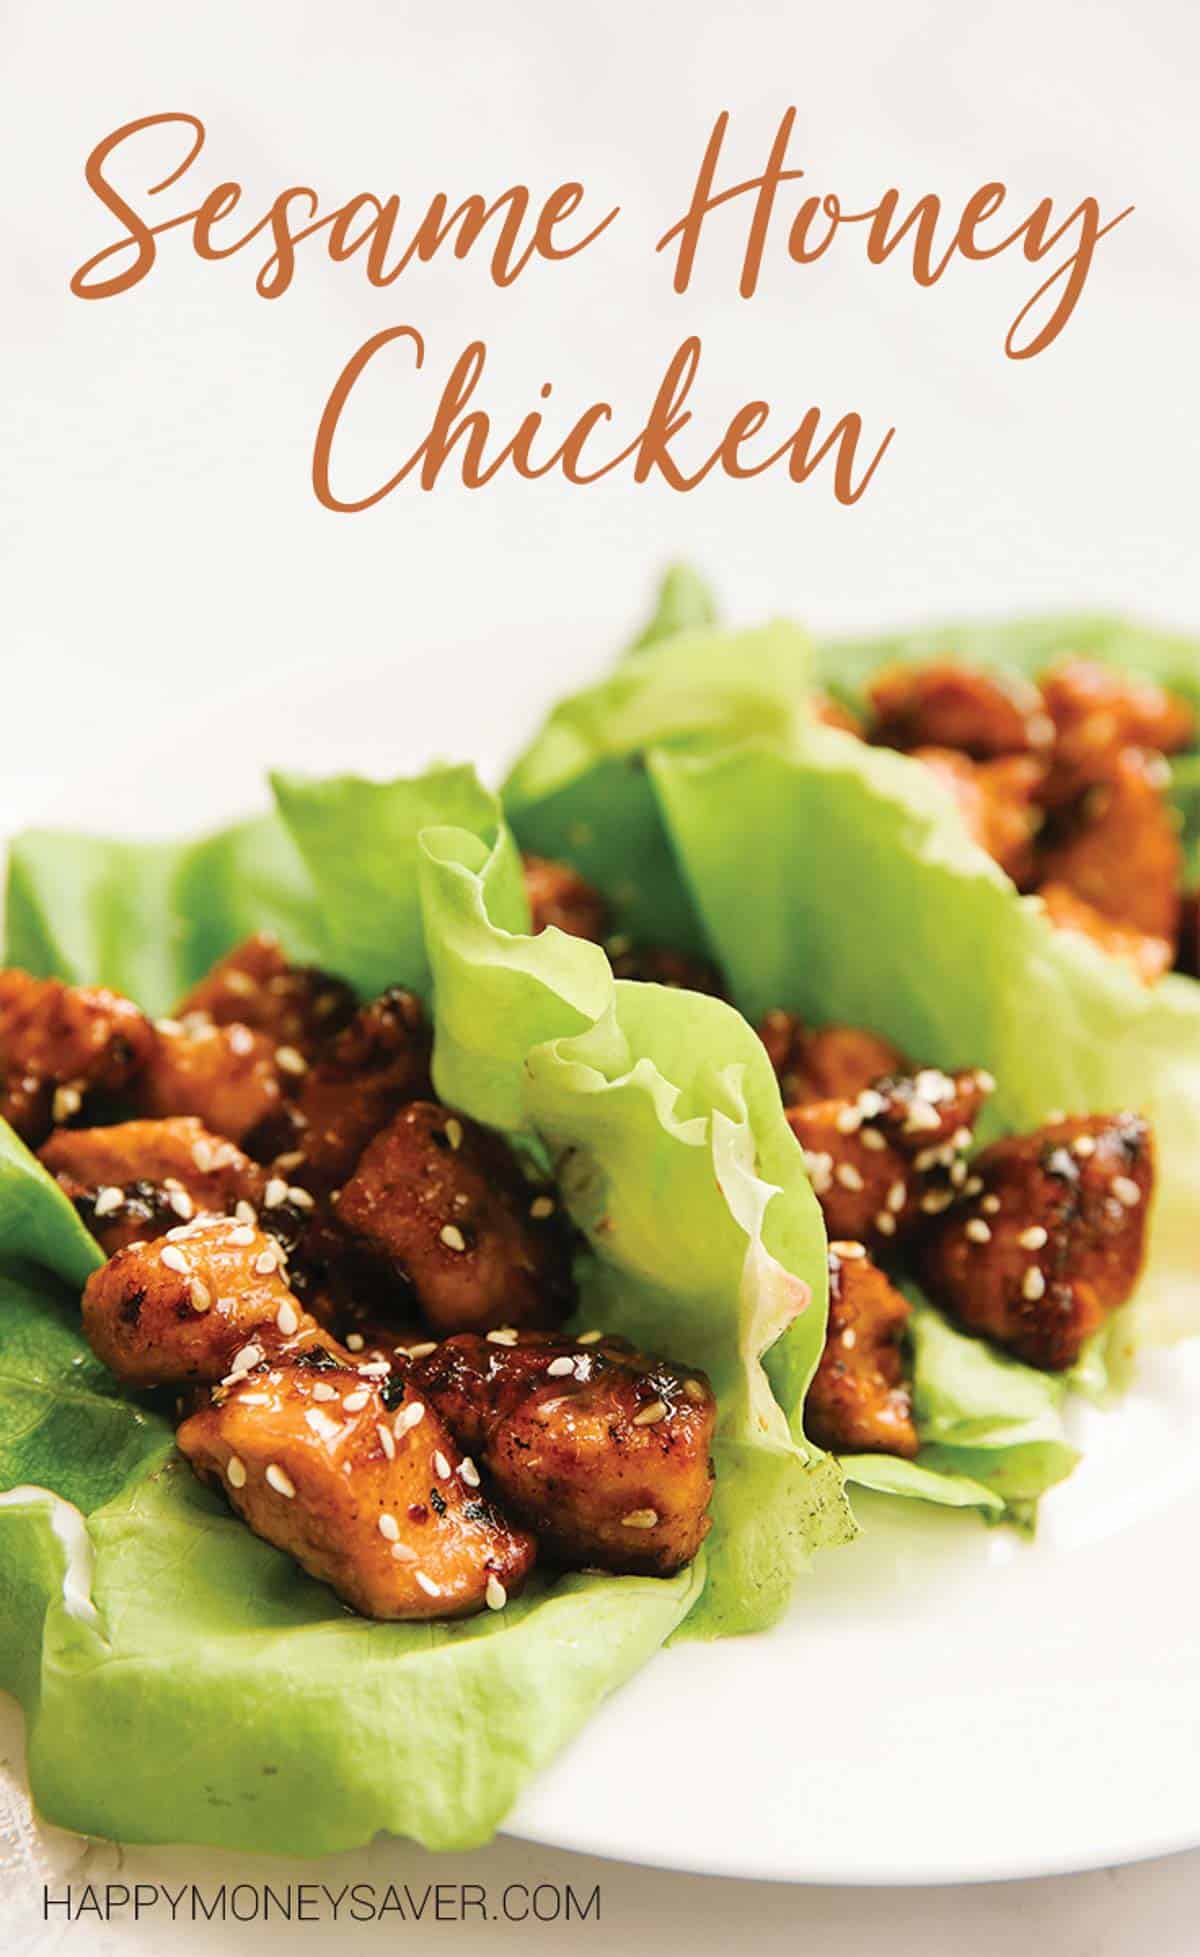 3 lettuce wraps with chicken in them topped with sesame seeds with the words Sesame Honey Chicken at the top and Happymoneysaver.com at the bottom.